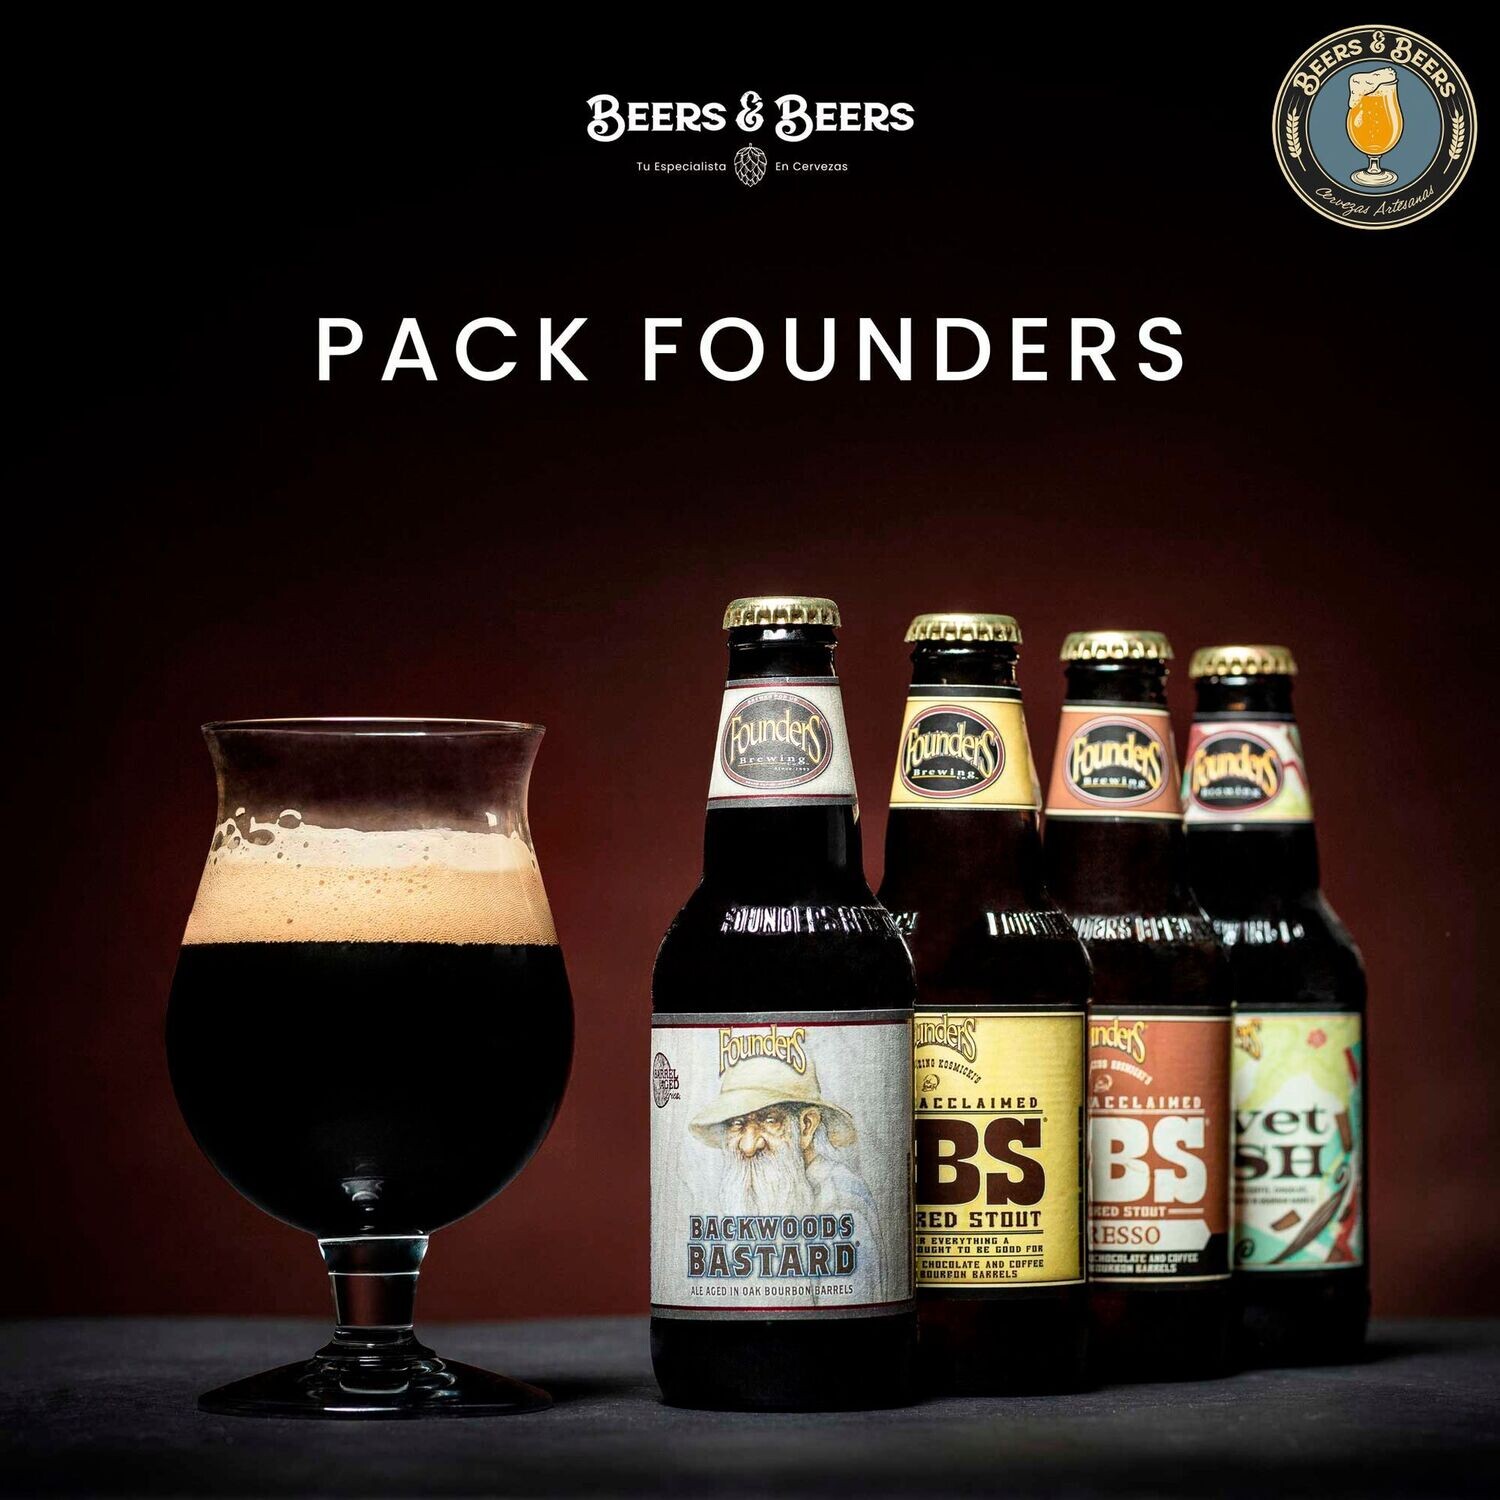 PACK FOUNDERS